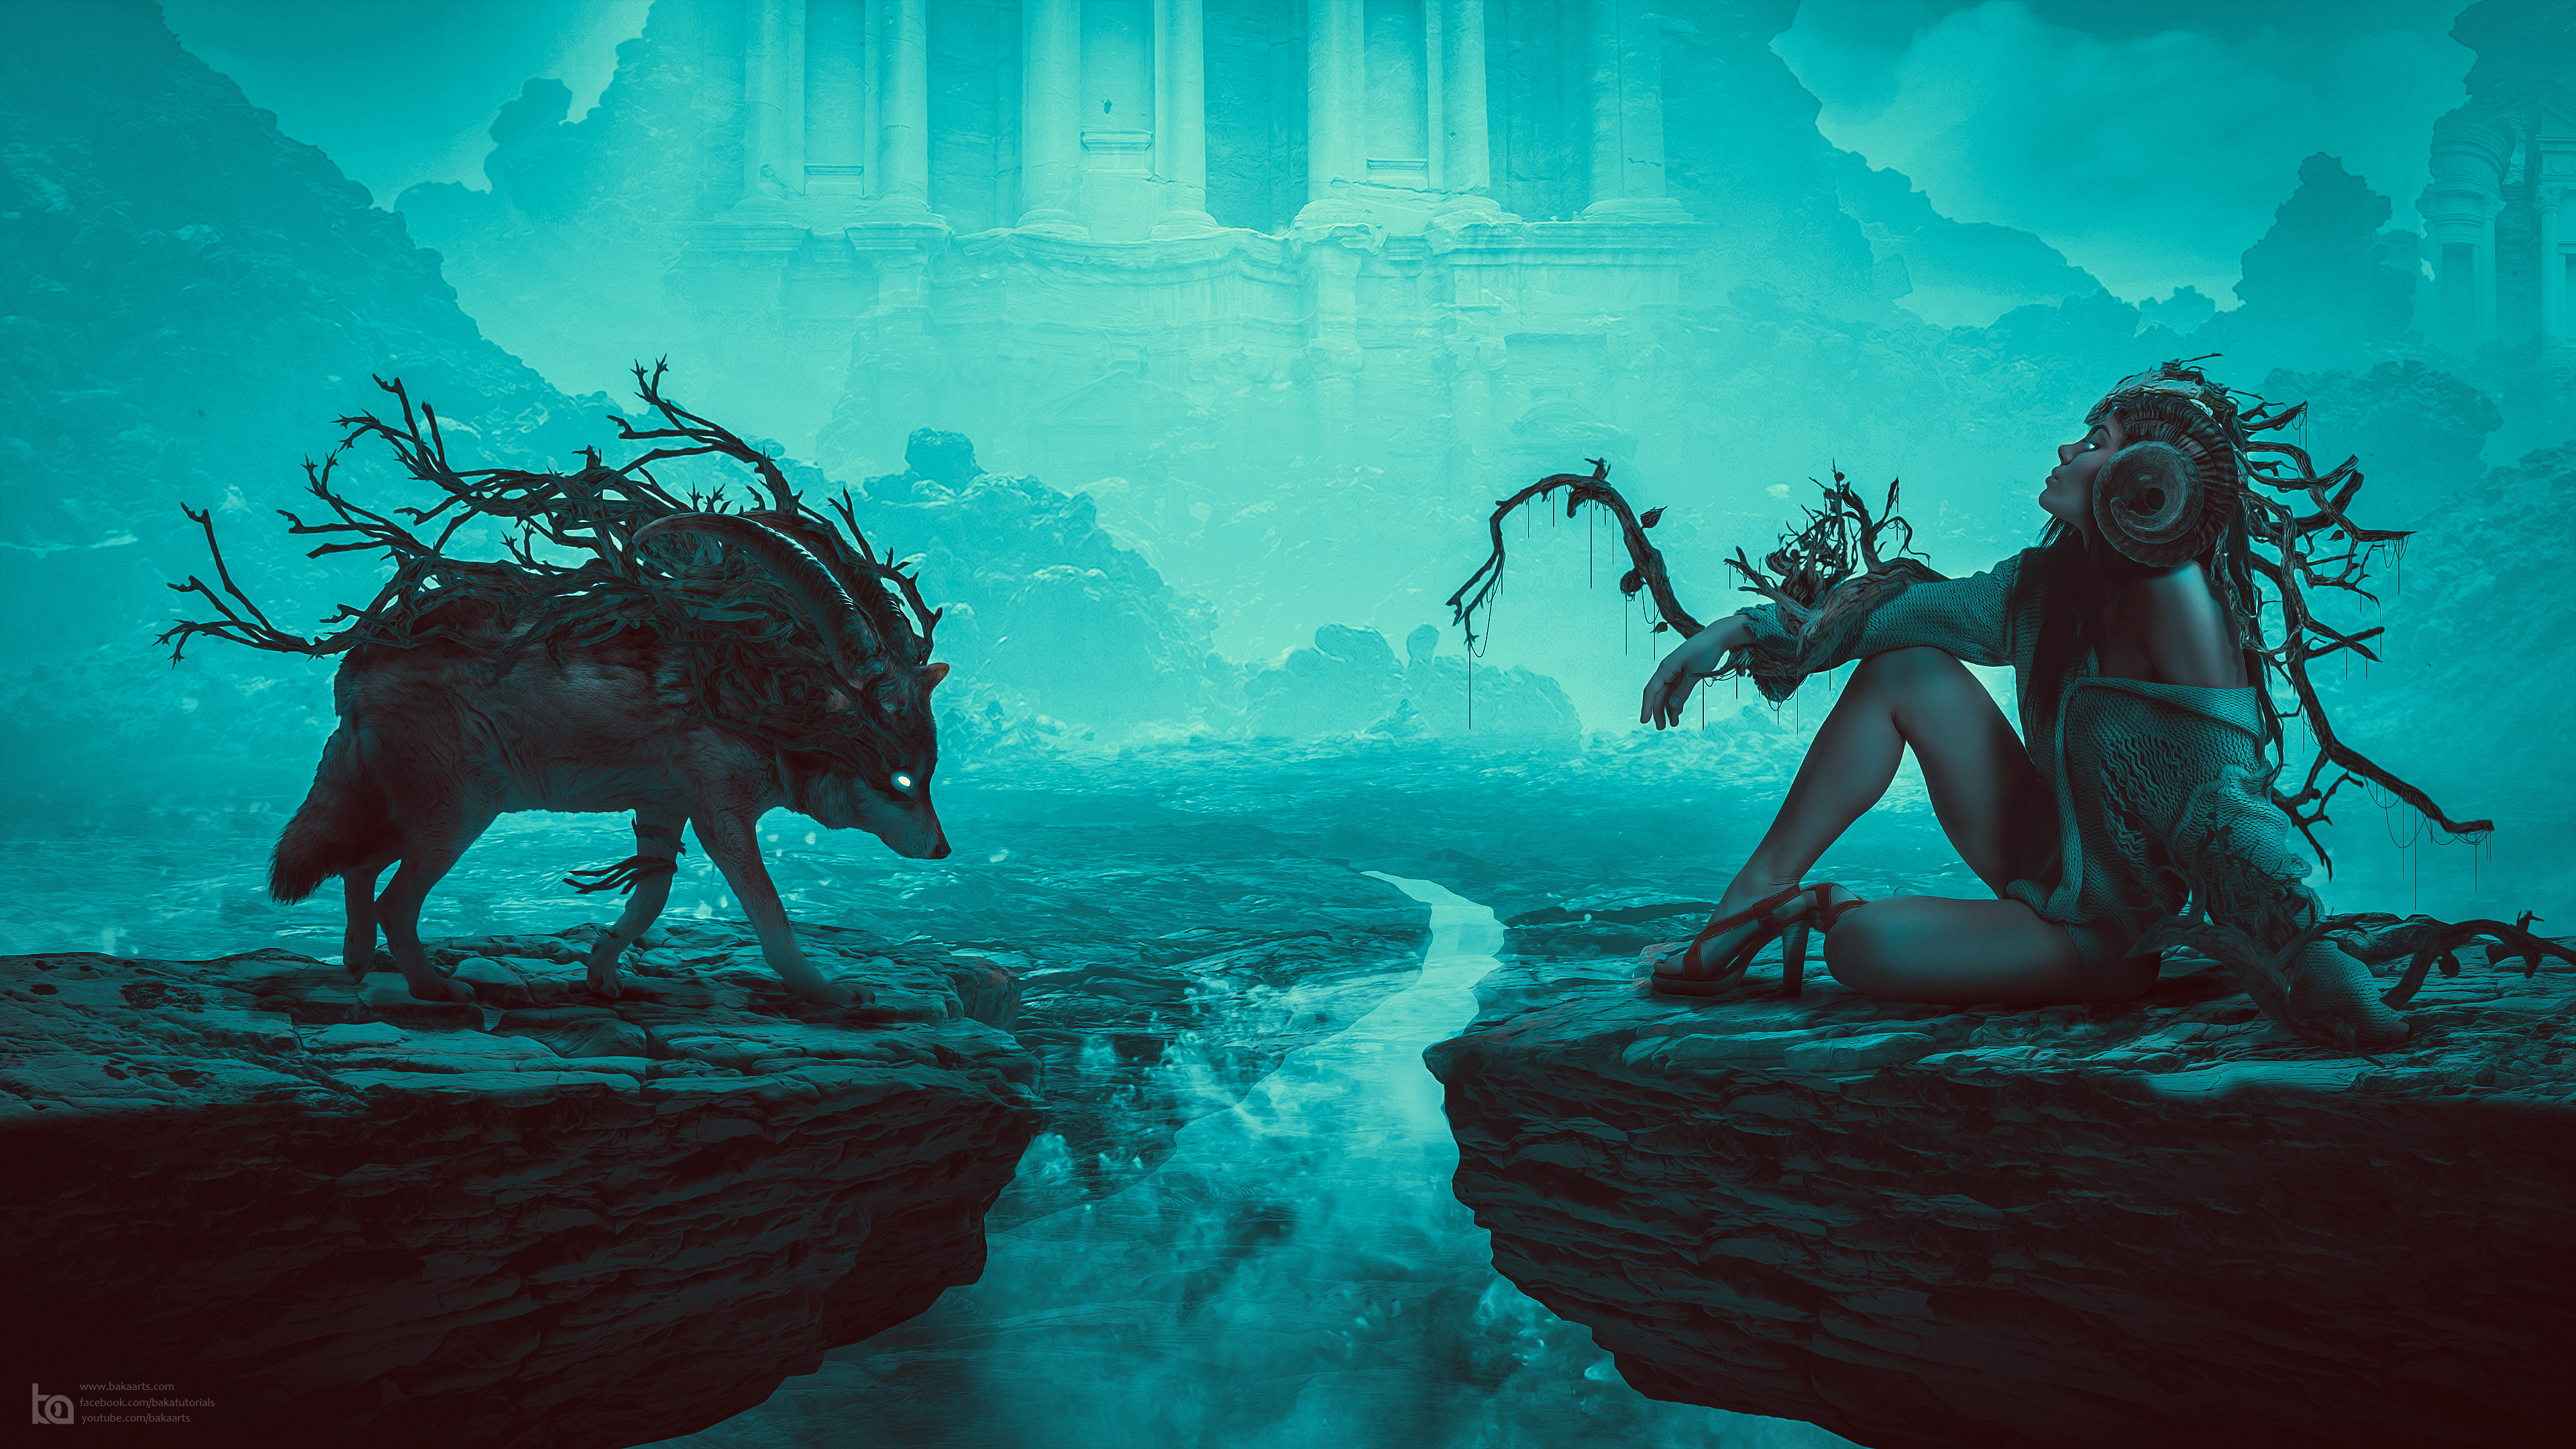 Labyrinth Wolf And Boy 3D Abstract Fantasy Art
 Wallpapers